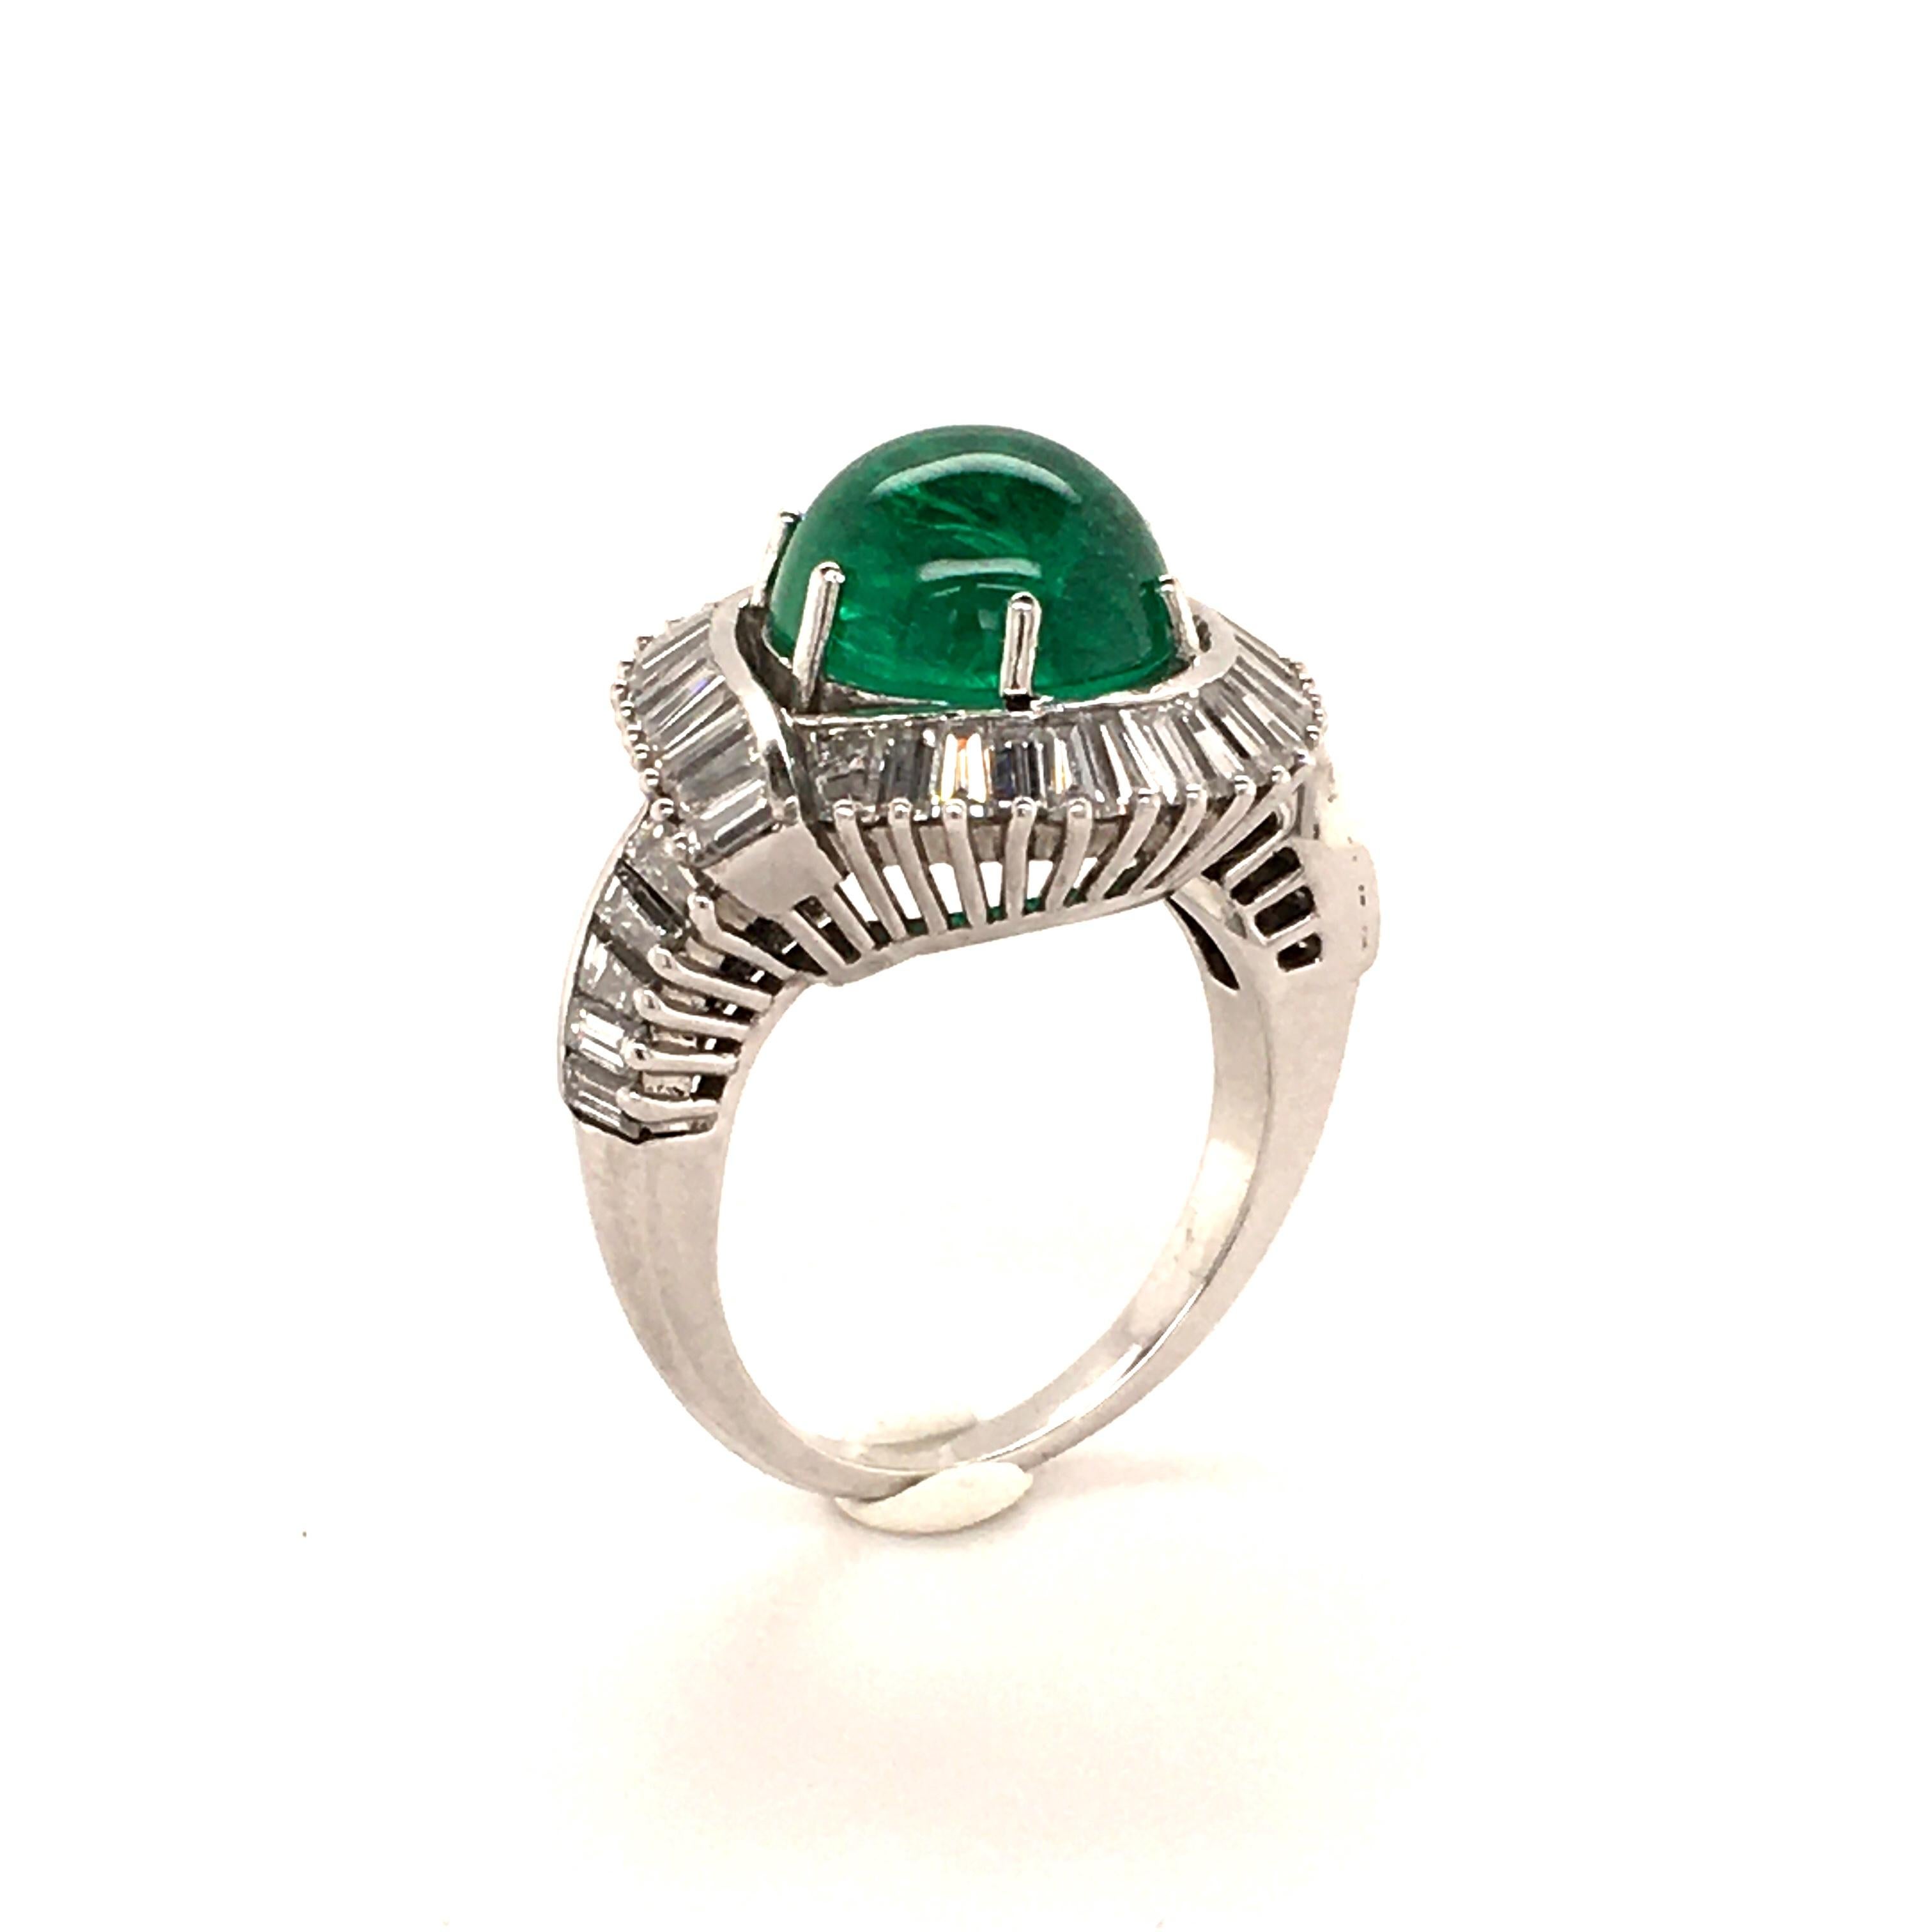 5.69 Carat Colombian Emerald and Diamond Ring in Platinum 950 In Good Condition For Sale In Lucerne, CH